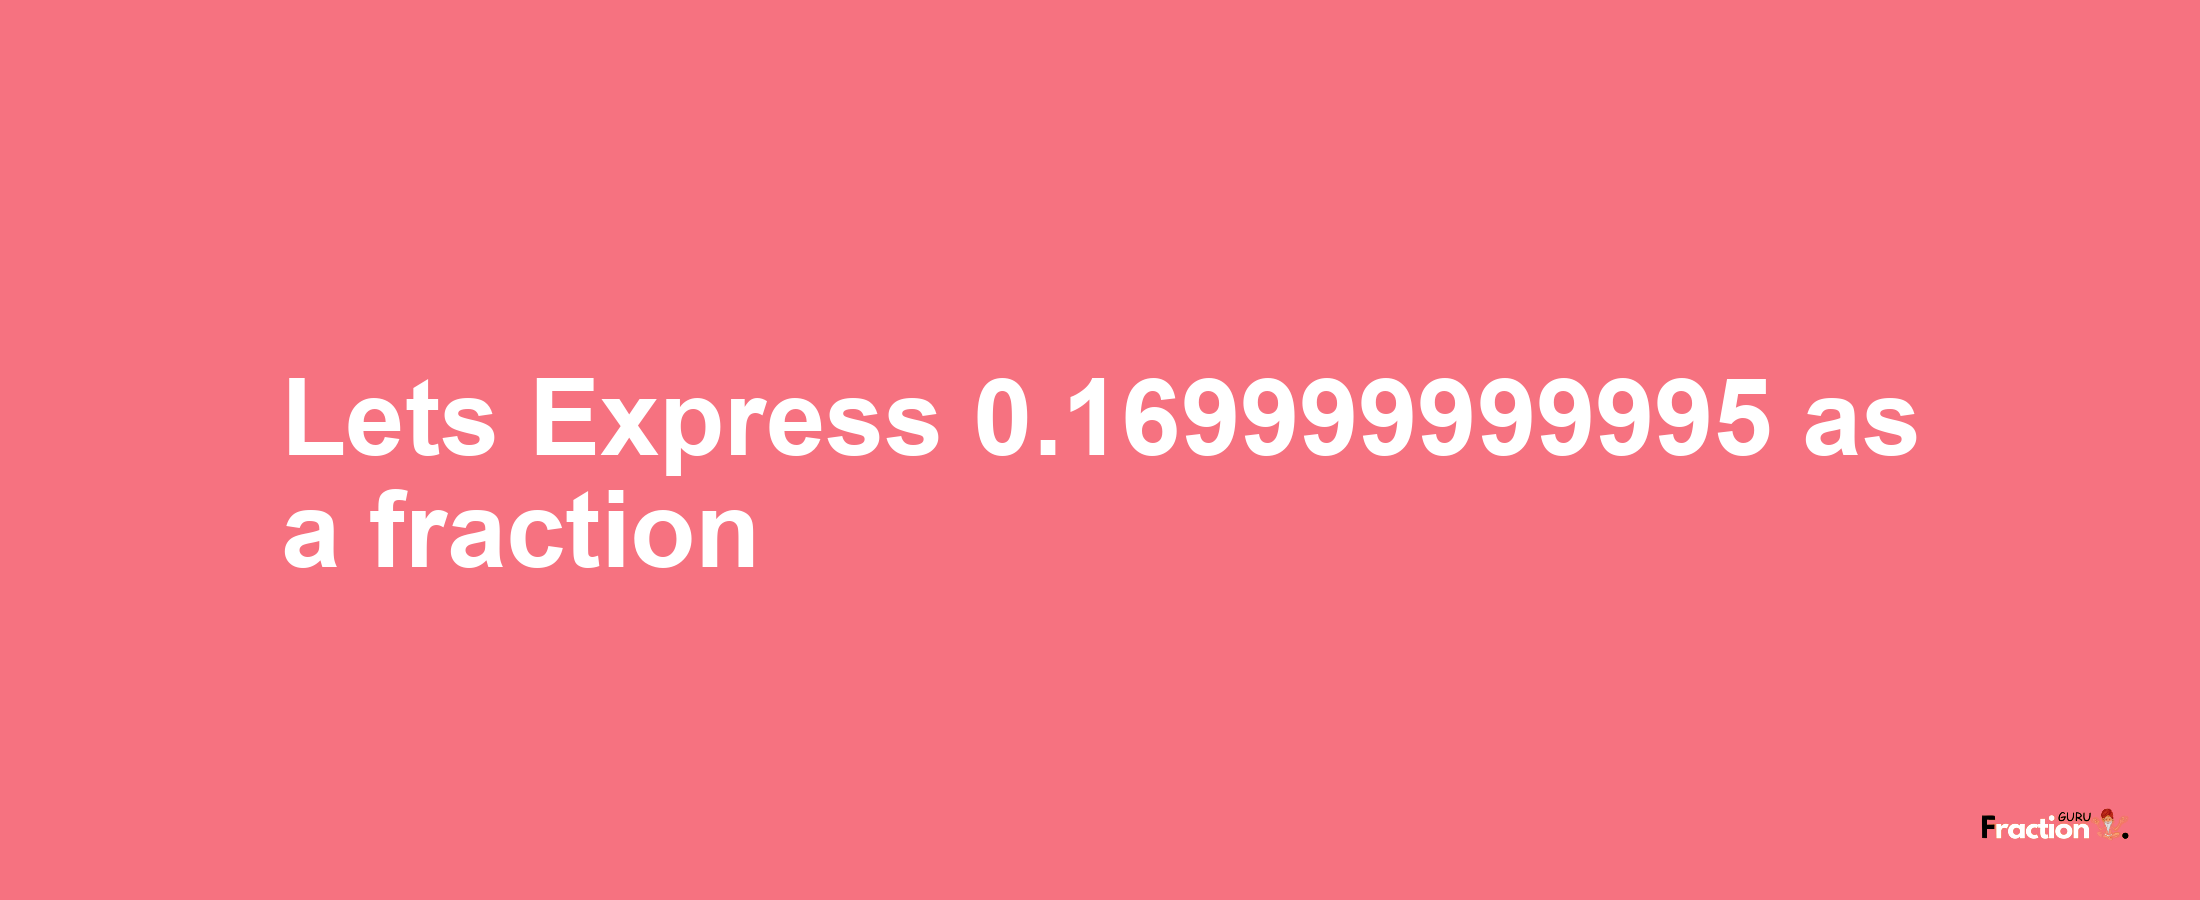 Lets Express 0.169999999995 as afraction